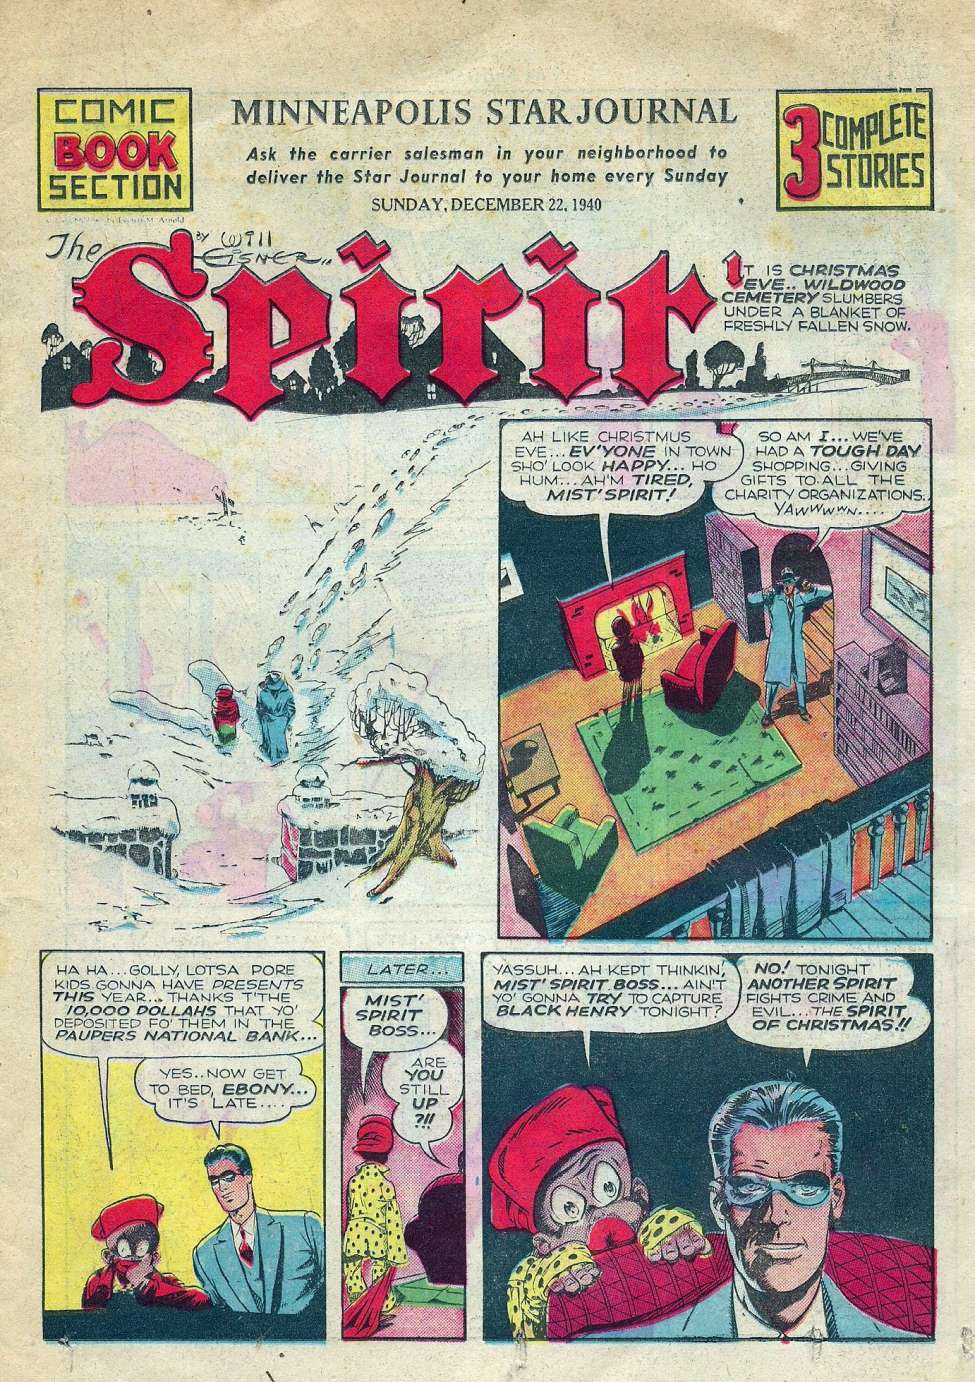 Book Cover For The Spirit (1940-12-22) - Minneapolis Star Journal